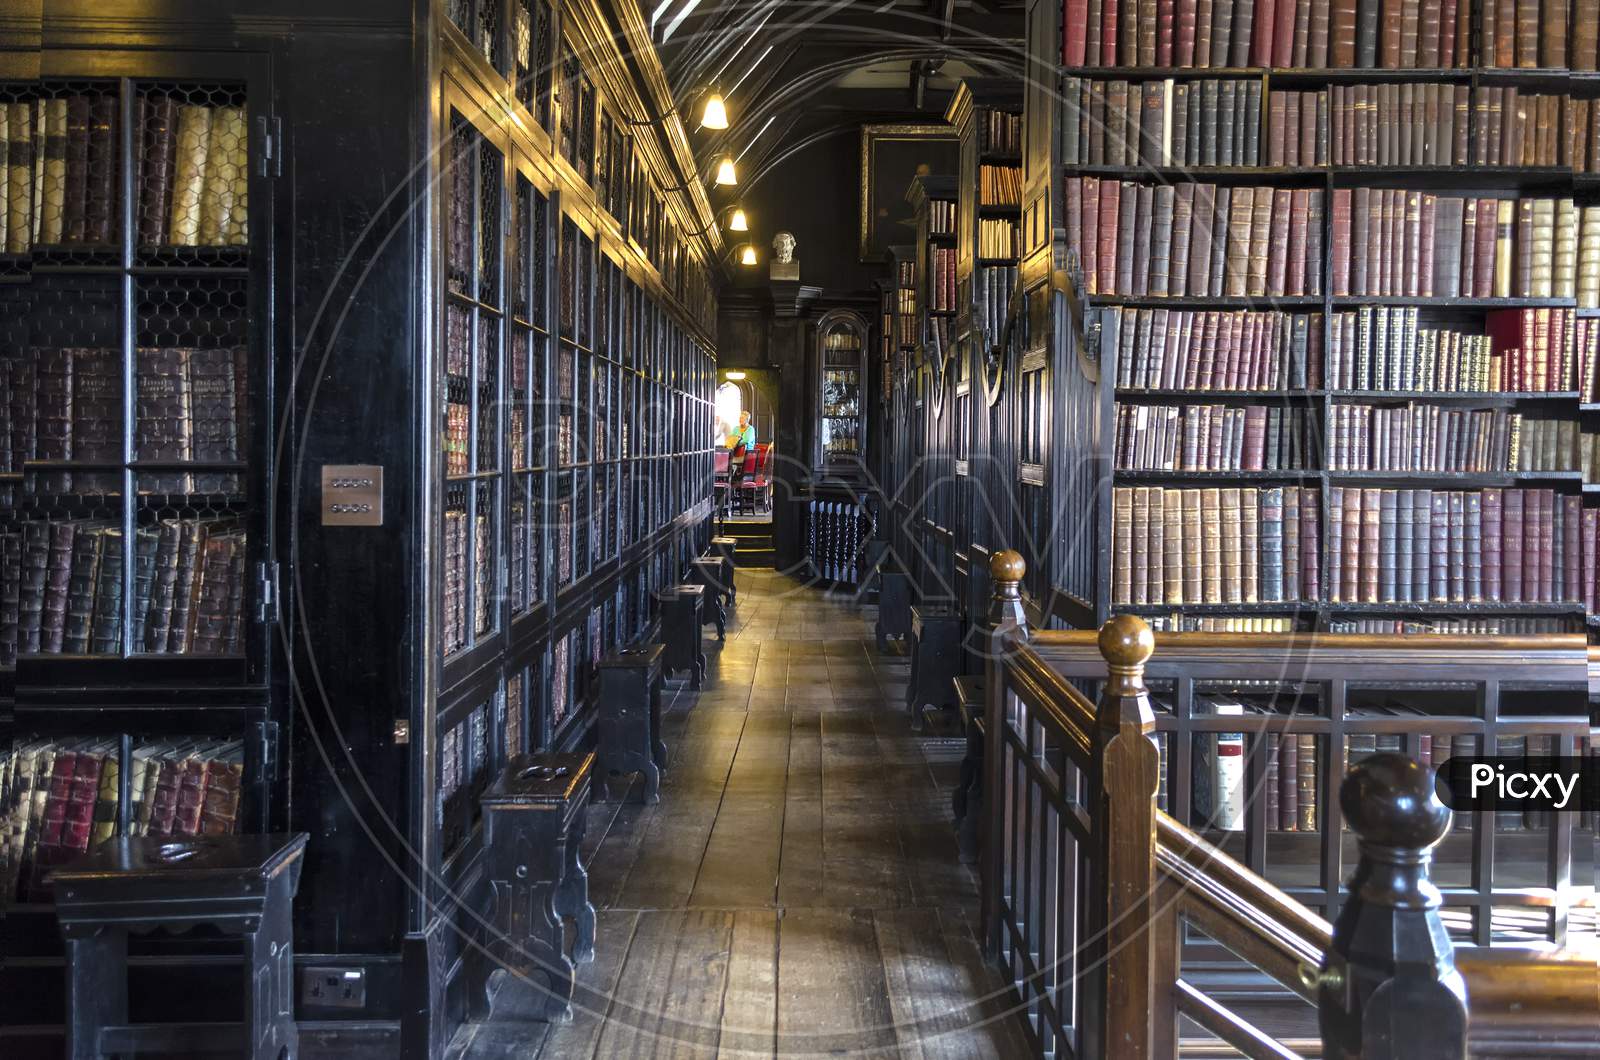 Chetham’s Library Manchester England. 18 April 2018.